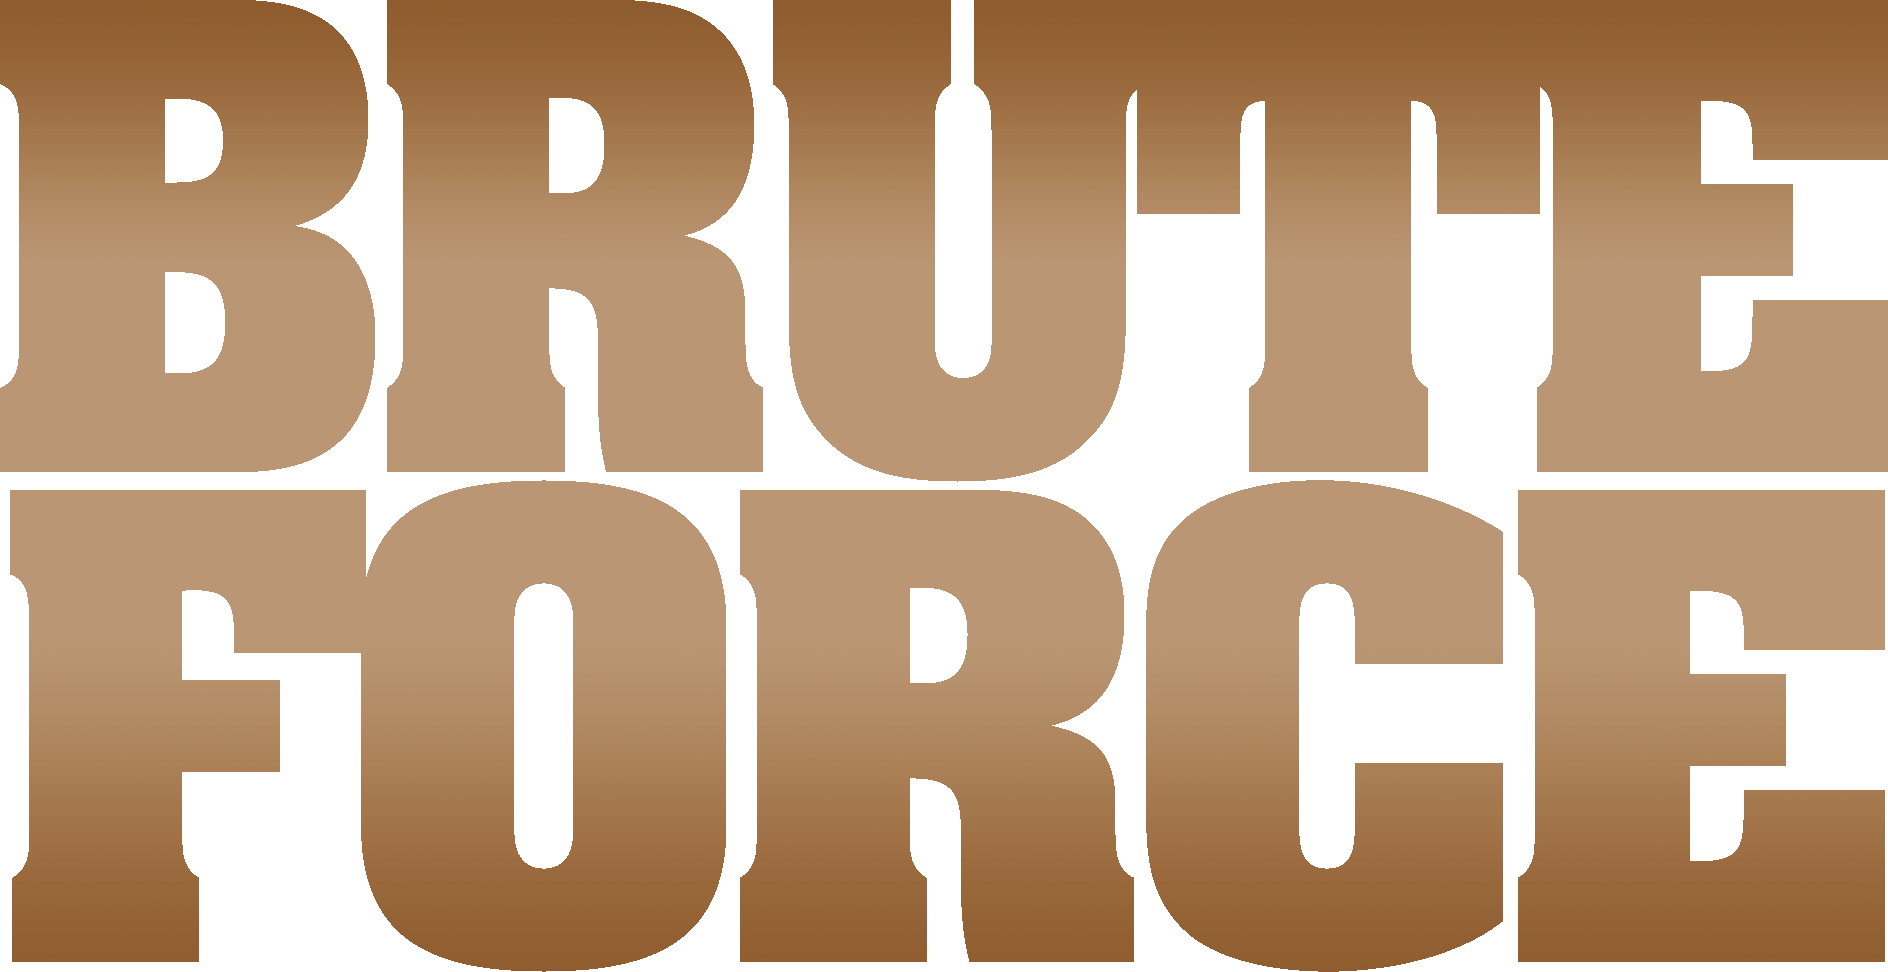 Brute Force title